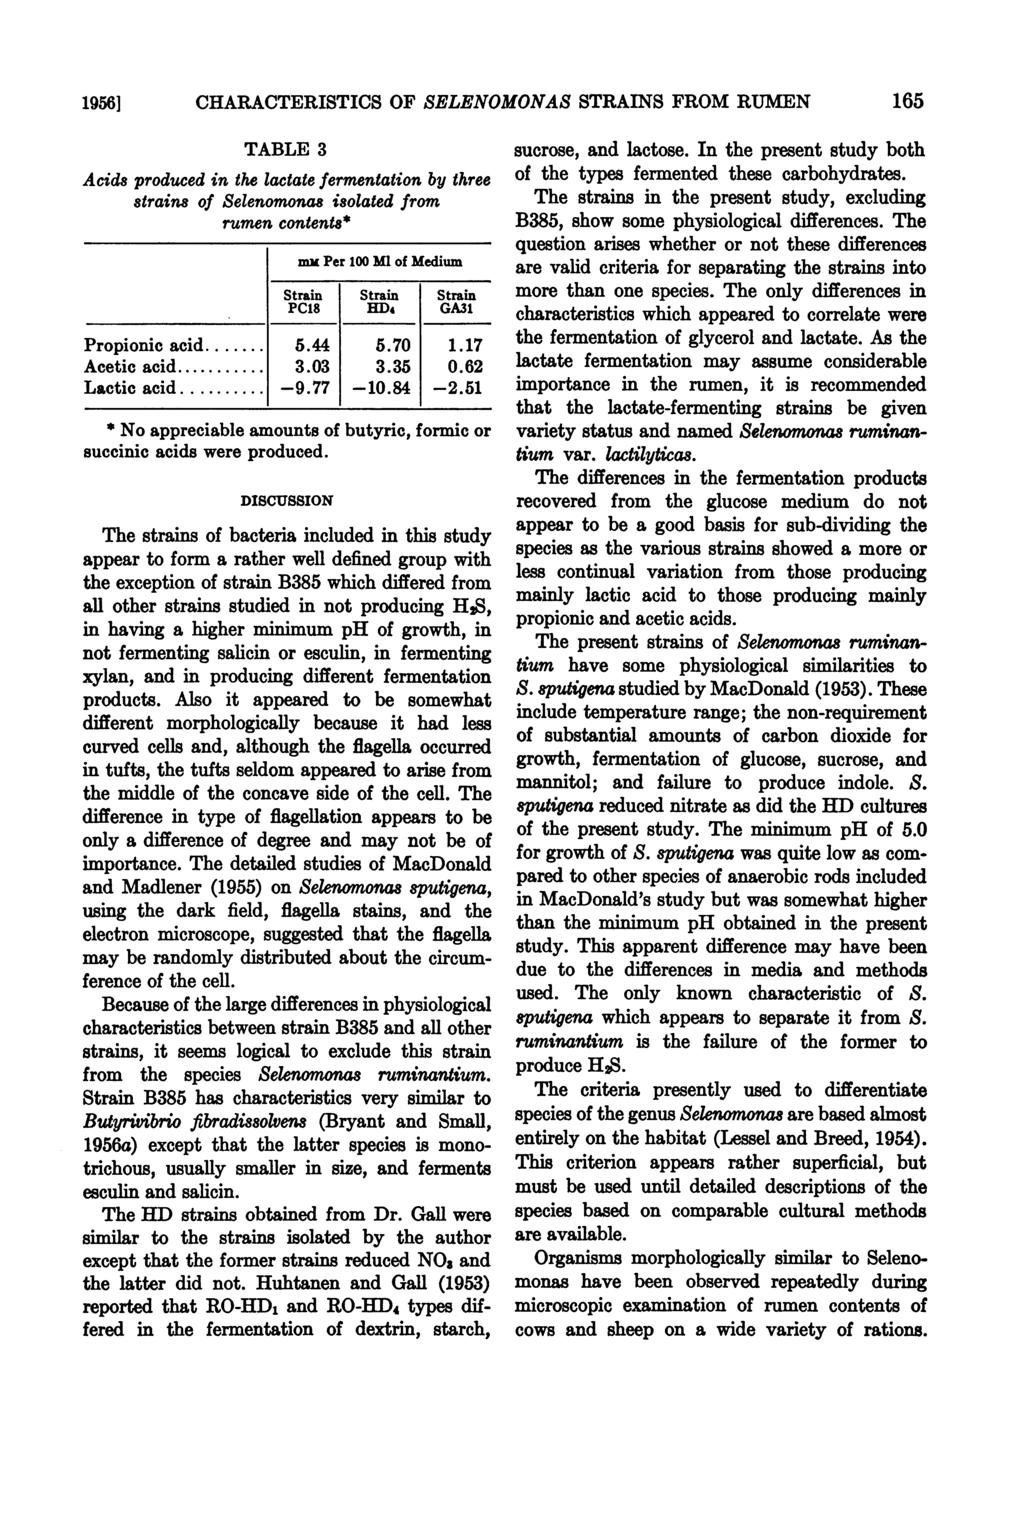 19561 CHARACTERISTICS OF SELENOMONAS STRAINS FROM RUMEN TABLE 3 Acids produced in the lactate fermentation by three 8train8 of Selenomonas isolated from rumen contents* mm Per 100 MI of Medium Strain